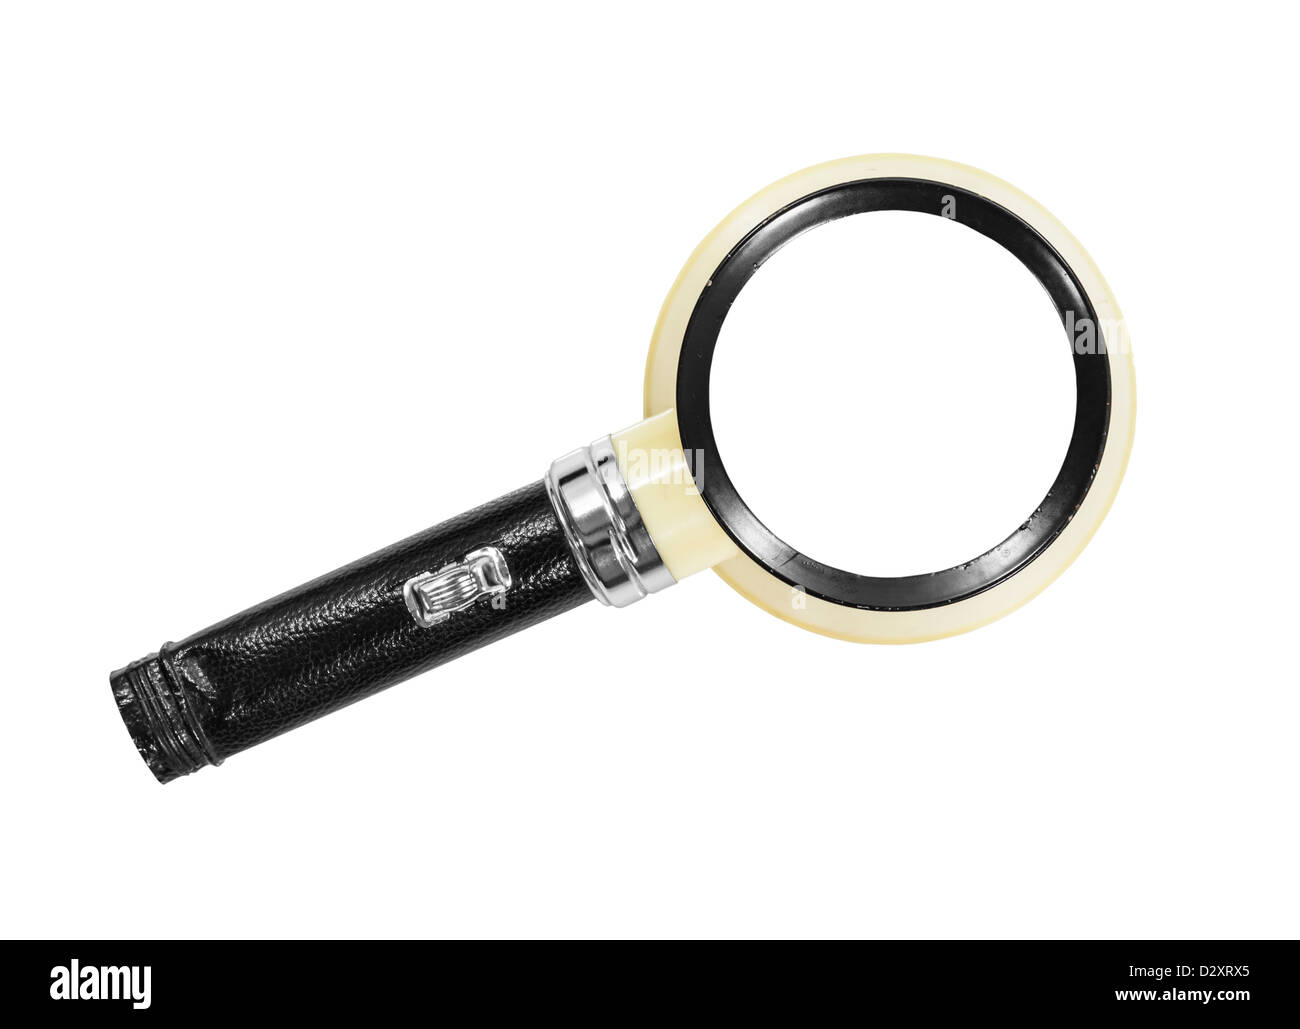 Vintage magnifying glass isolated with clipping path. Stock Photo